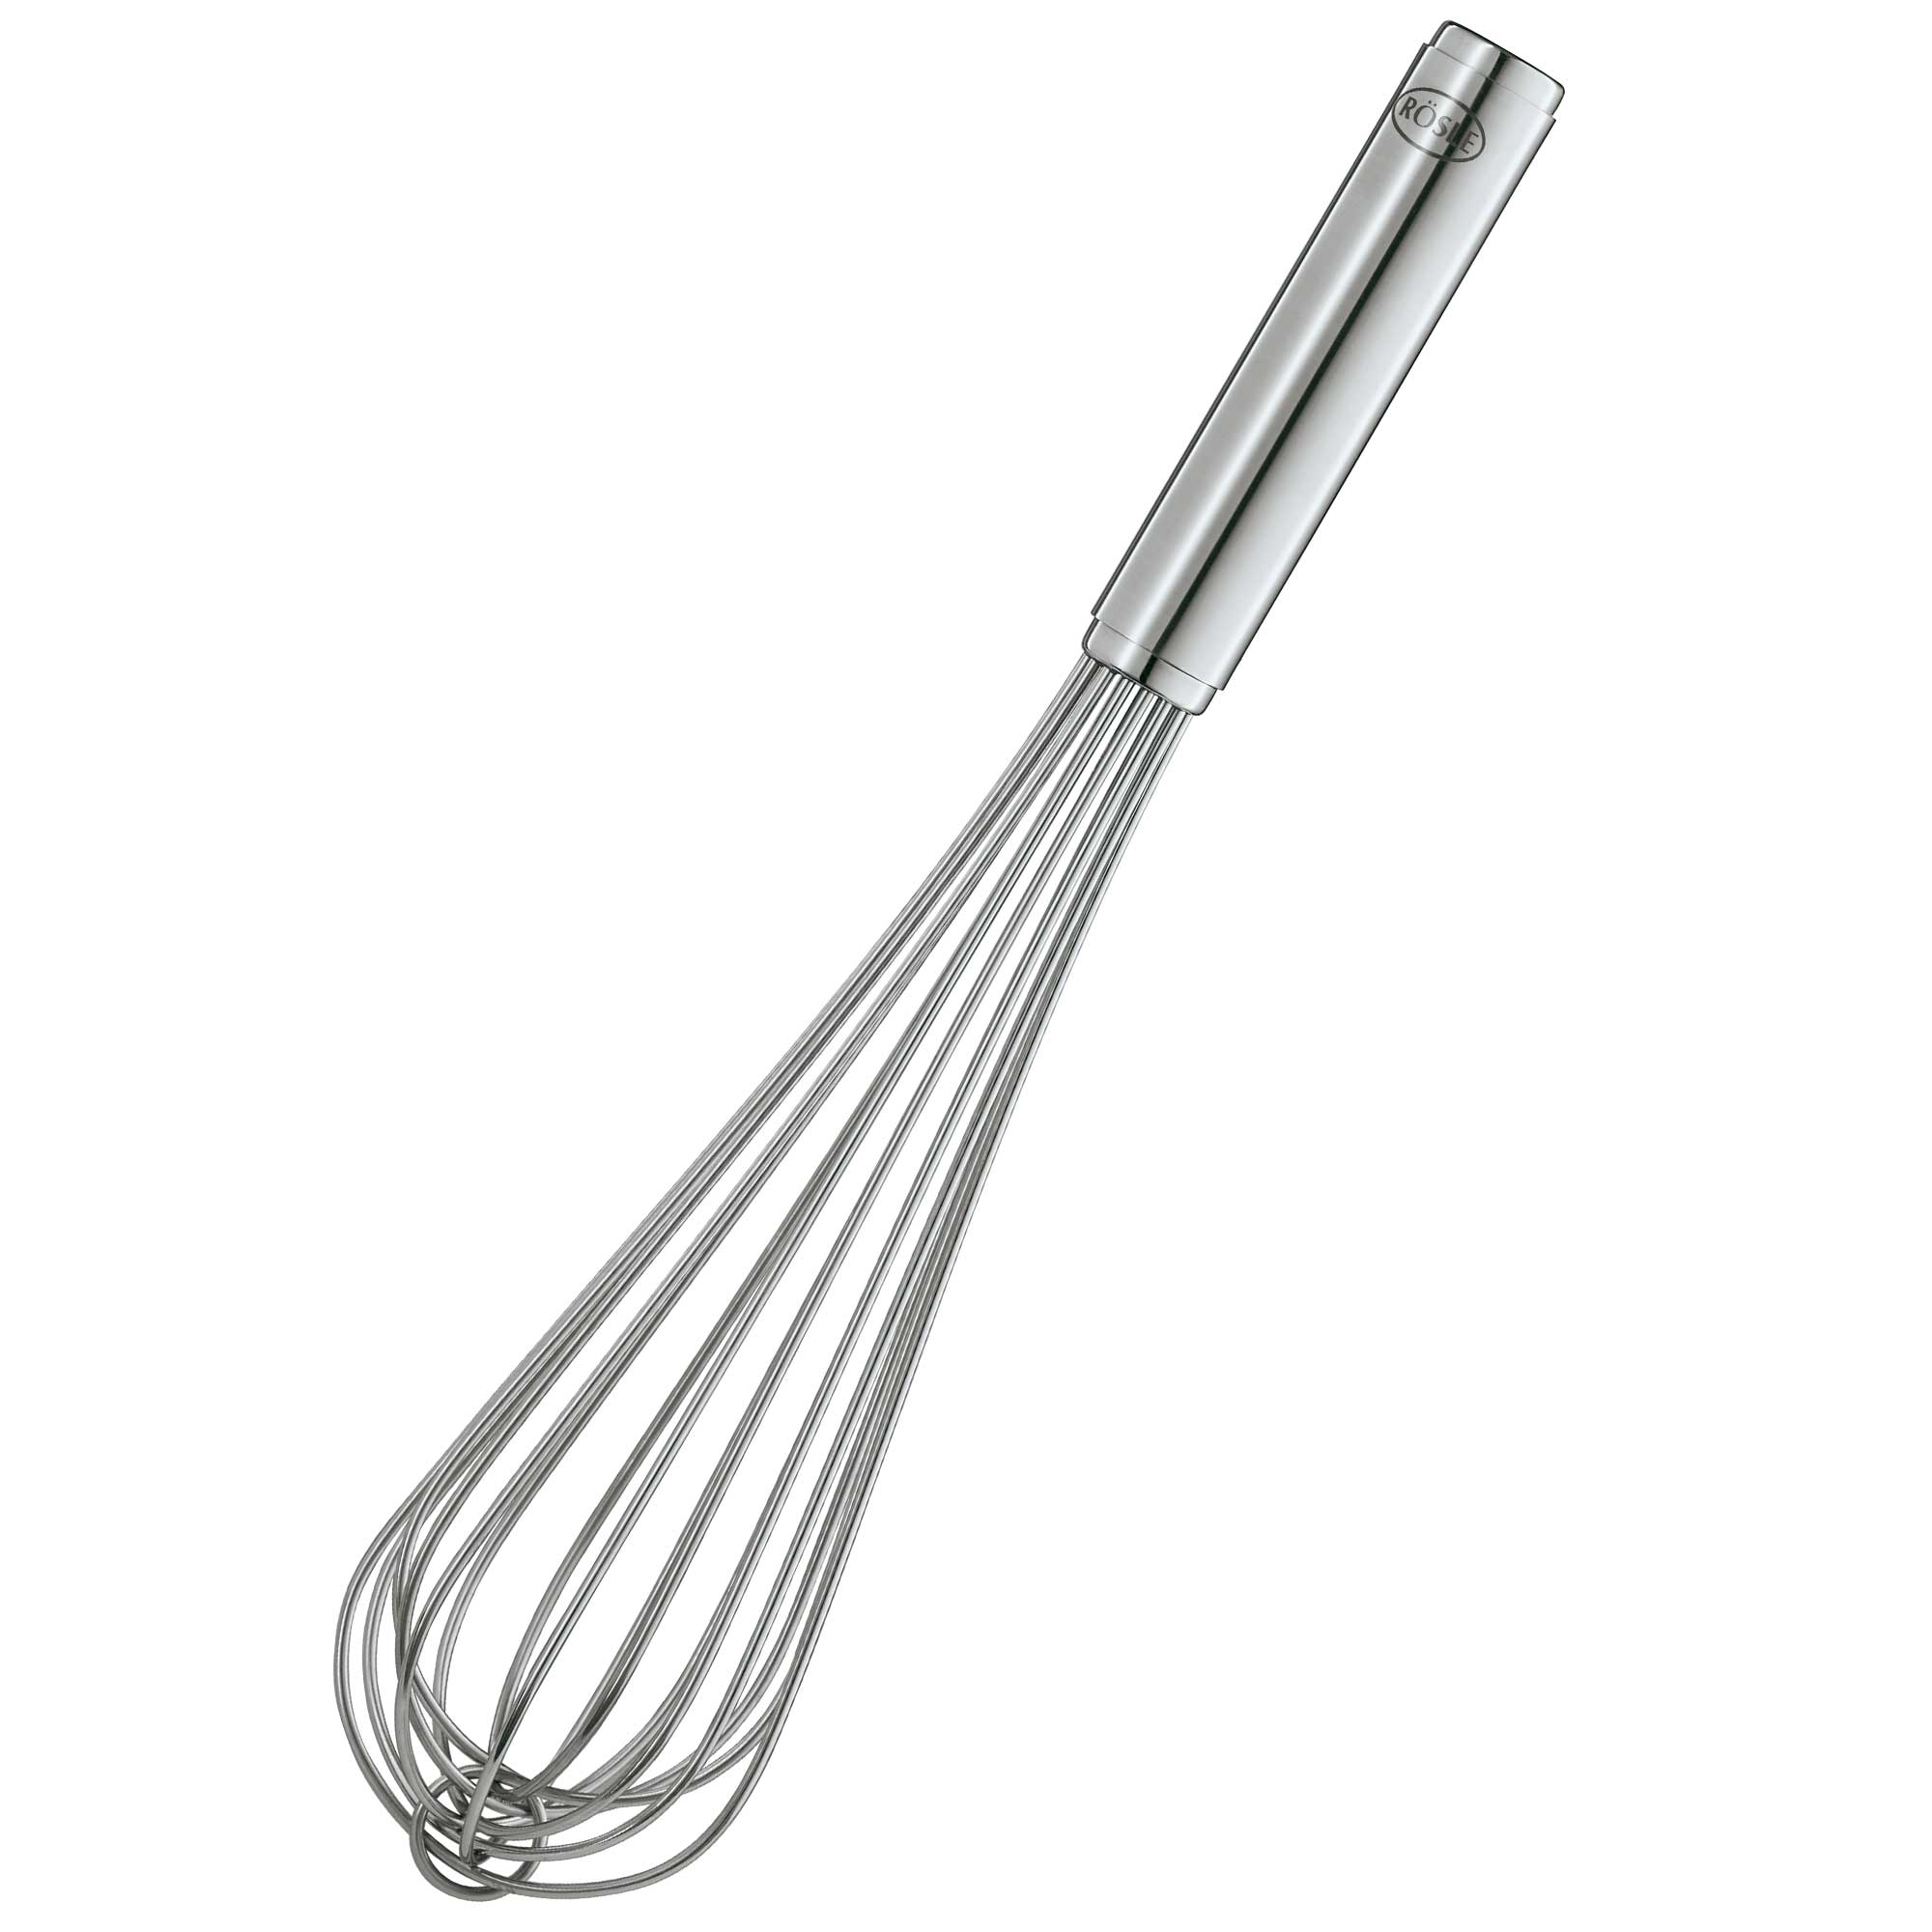 French Whisk 45 cm|17.7 in. Classic